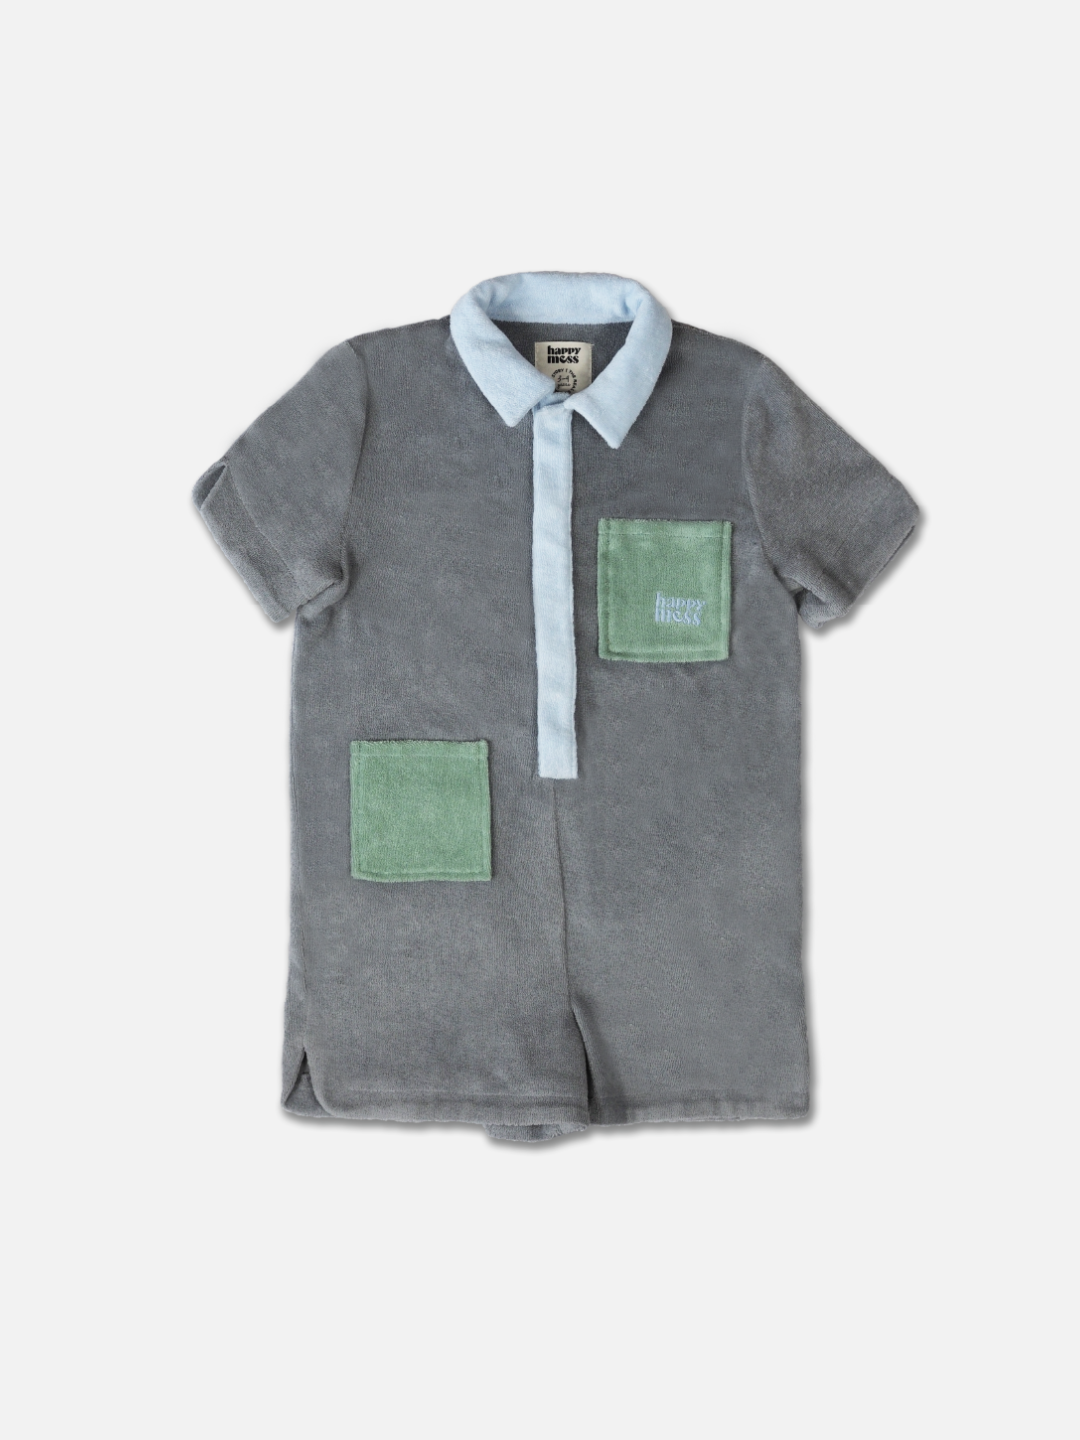 A kids' jumpsuit in pale gray with blue collar and placket, and two green pockets